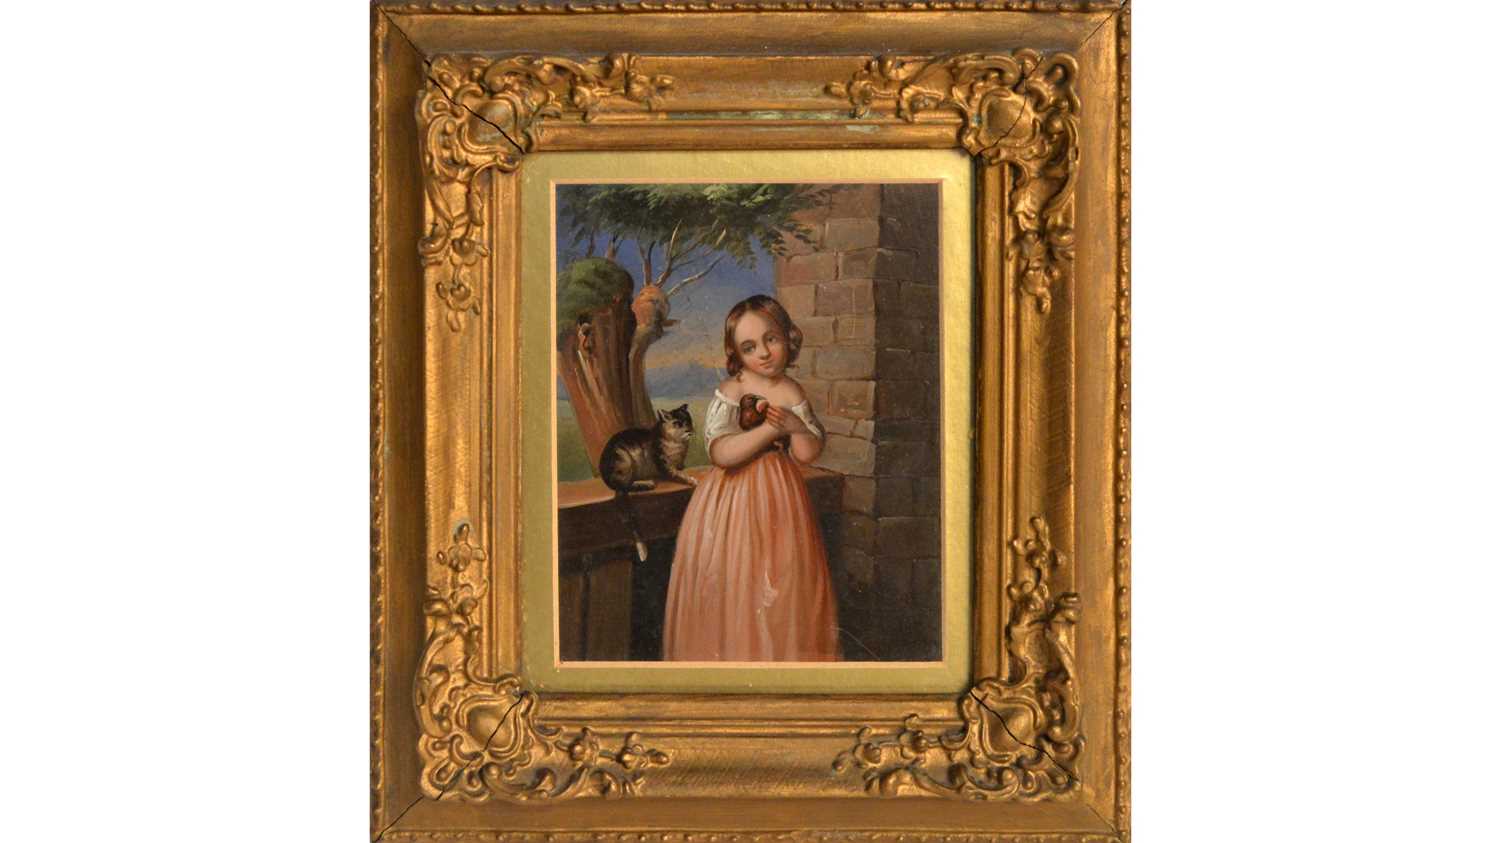 Lot 924 - 19th Century British School - Portrait of a Young Girl Holding a Bird from a Cat | oil